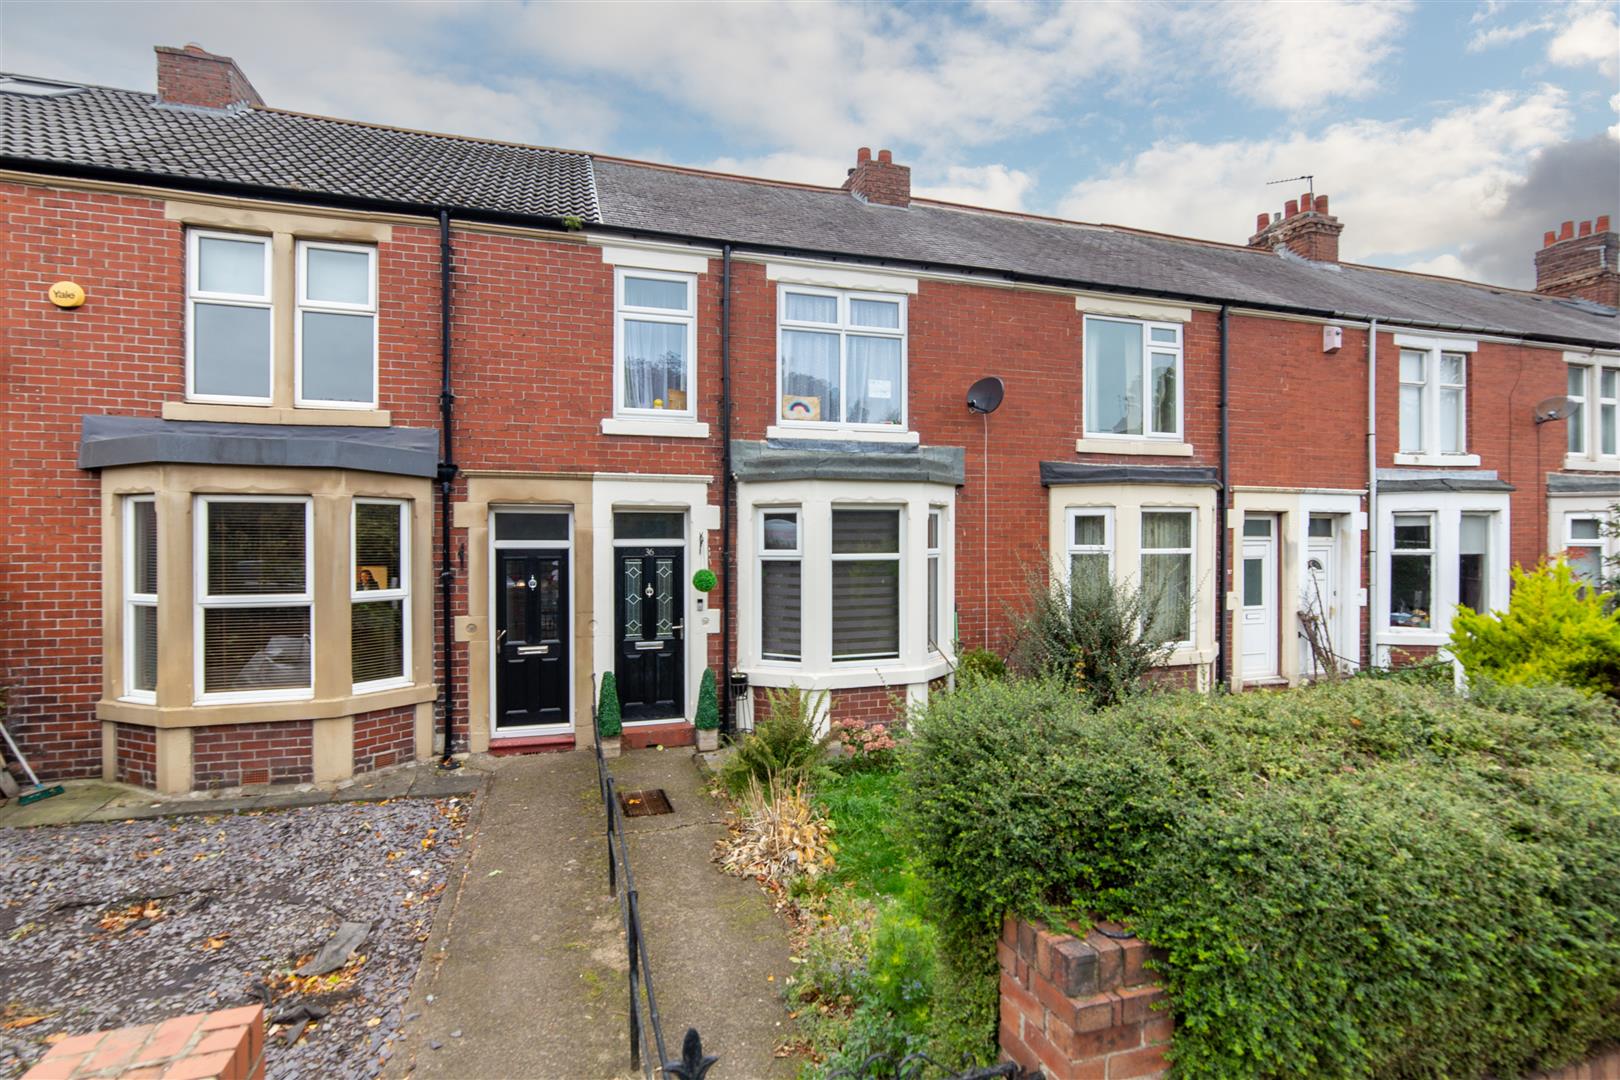 3 bed terraced house for sale in Park View, Wideopen, NE13